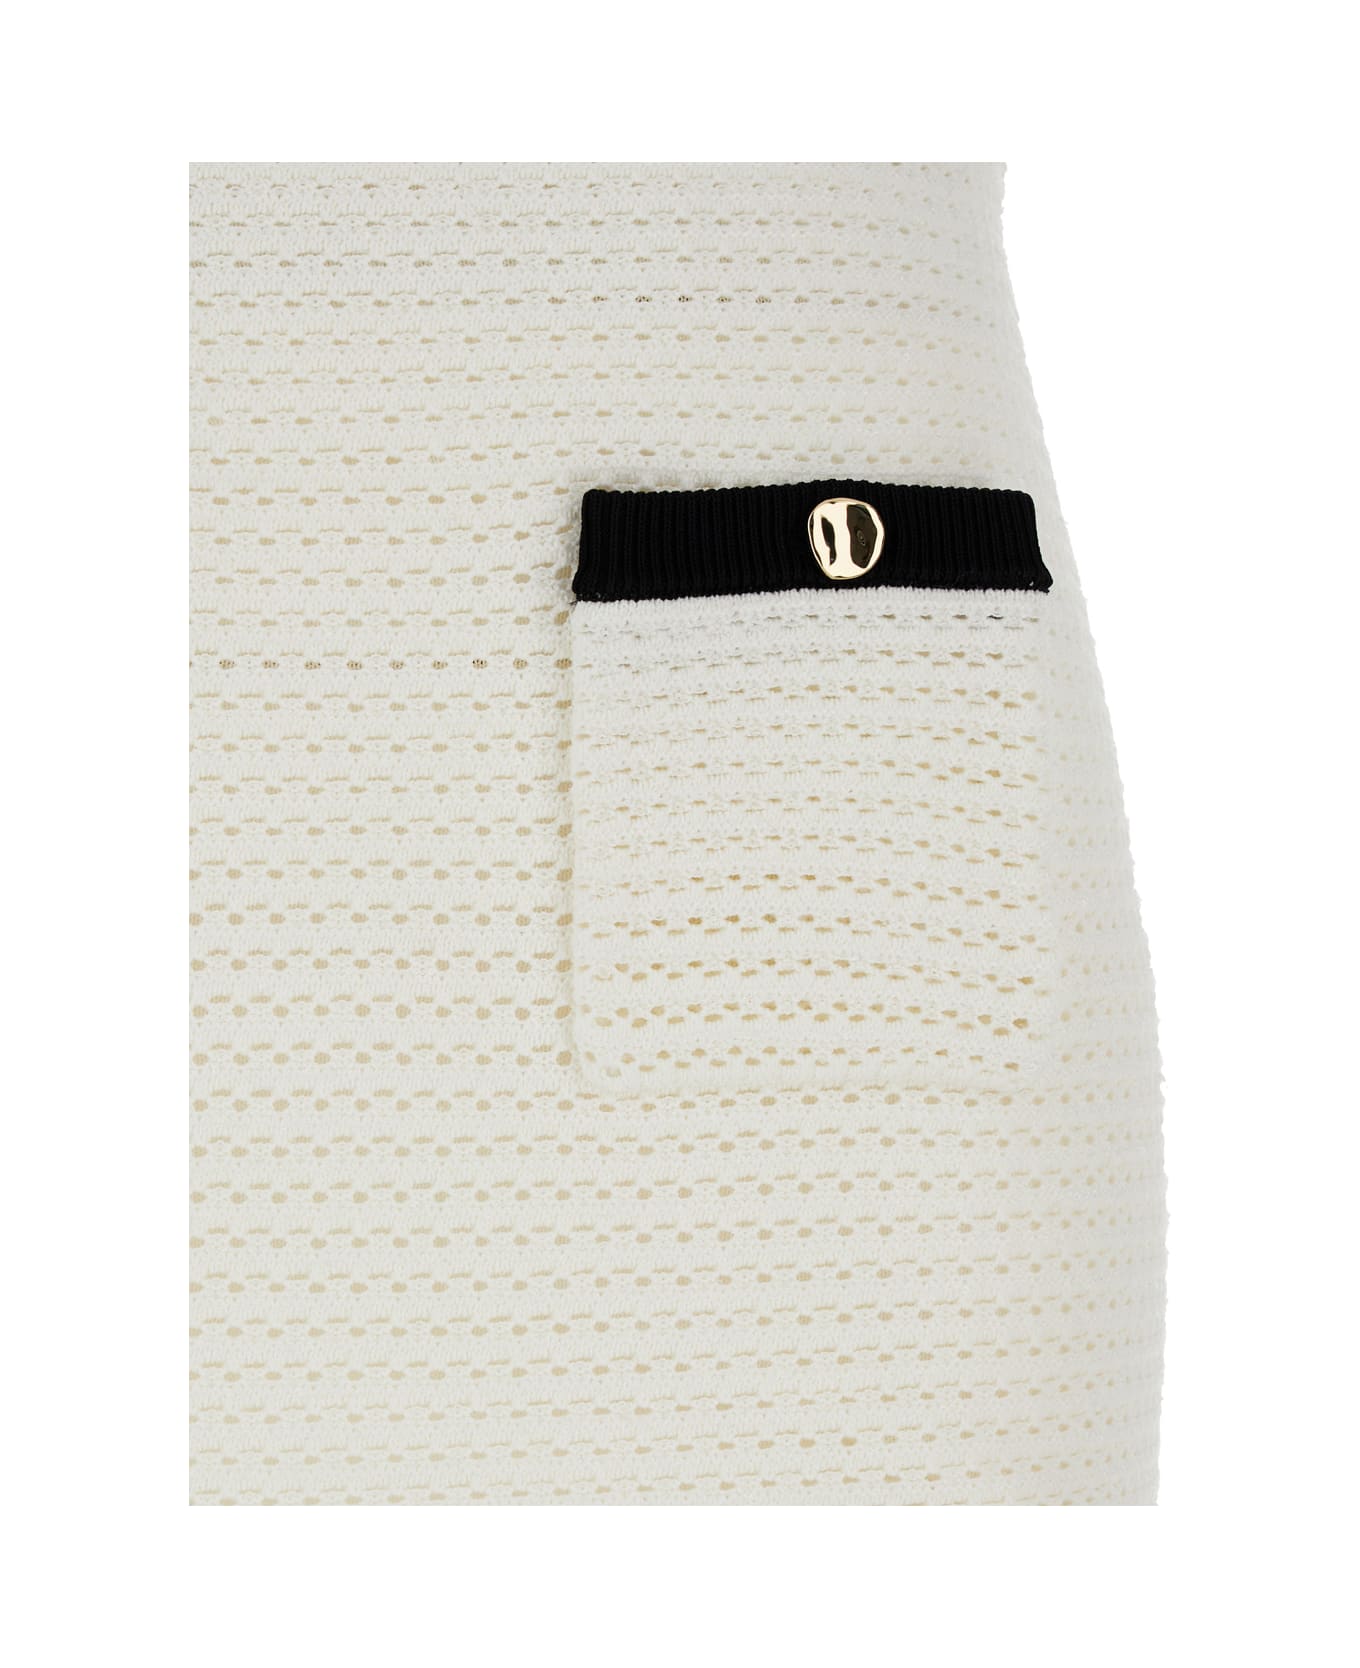 self-portrait Mini White Knit Skirt With Contrasting Trim In Fabric Woman - White